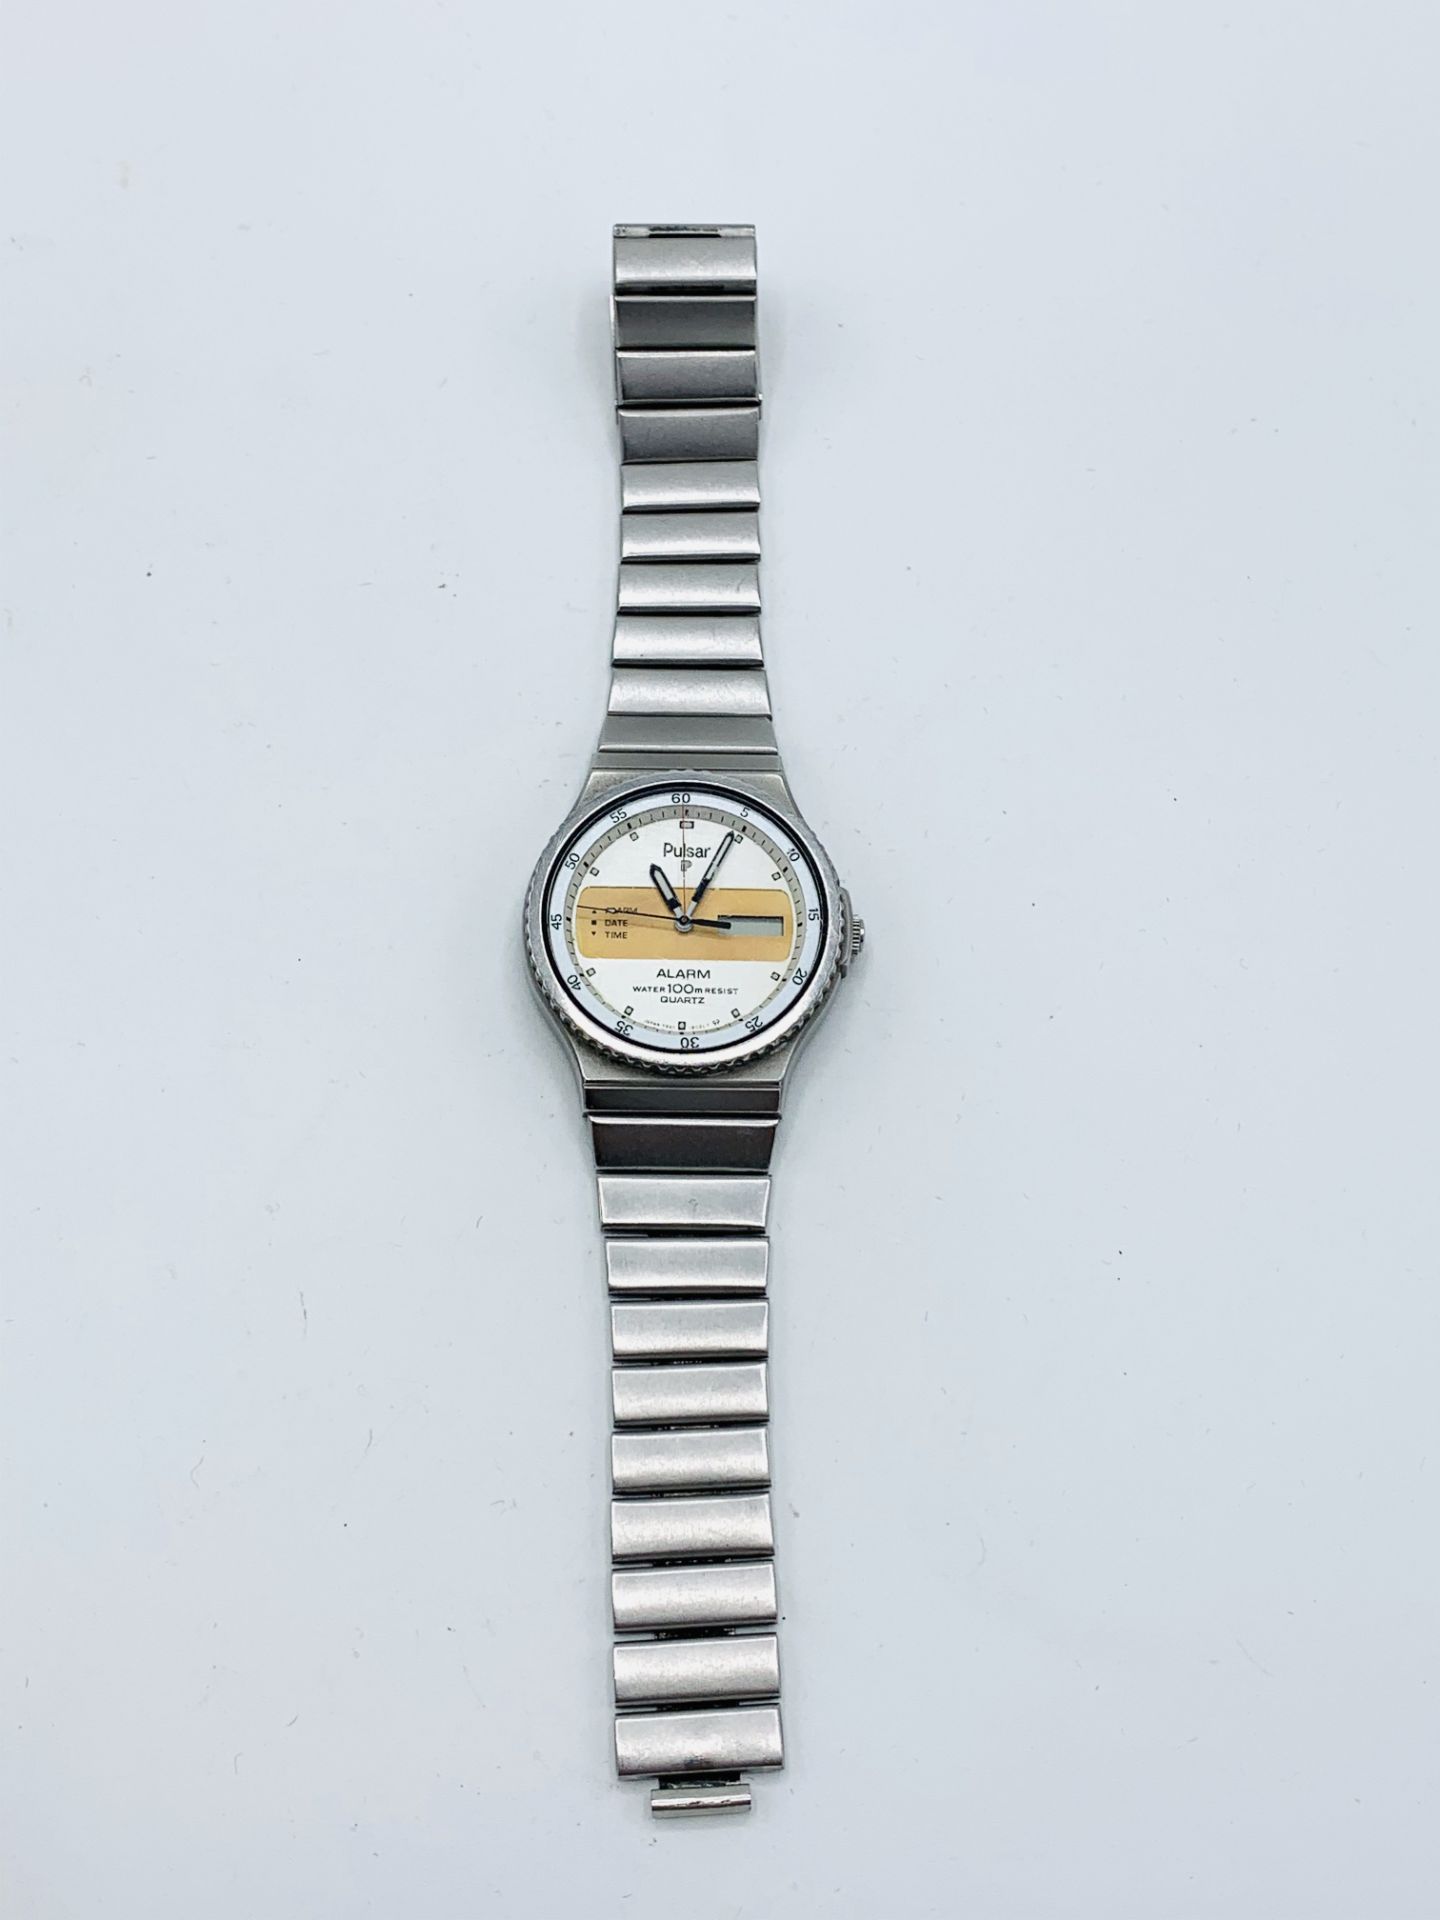 Marina De Luxe manual gent's wrist watch, no strap, going; Liban automatic wrist watch, and 2 others - Image 6 of 6